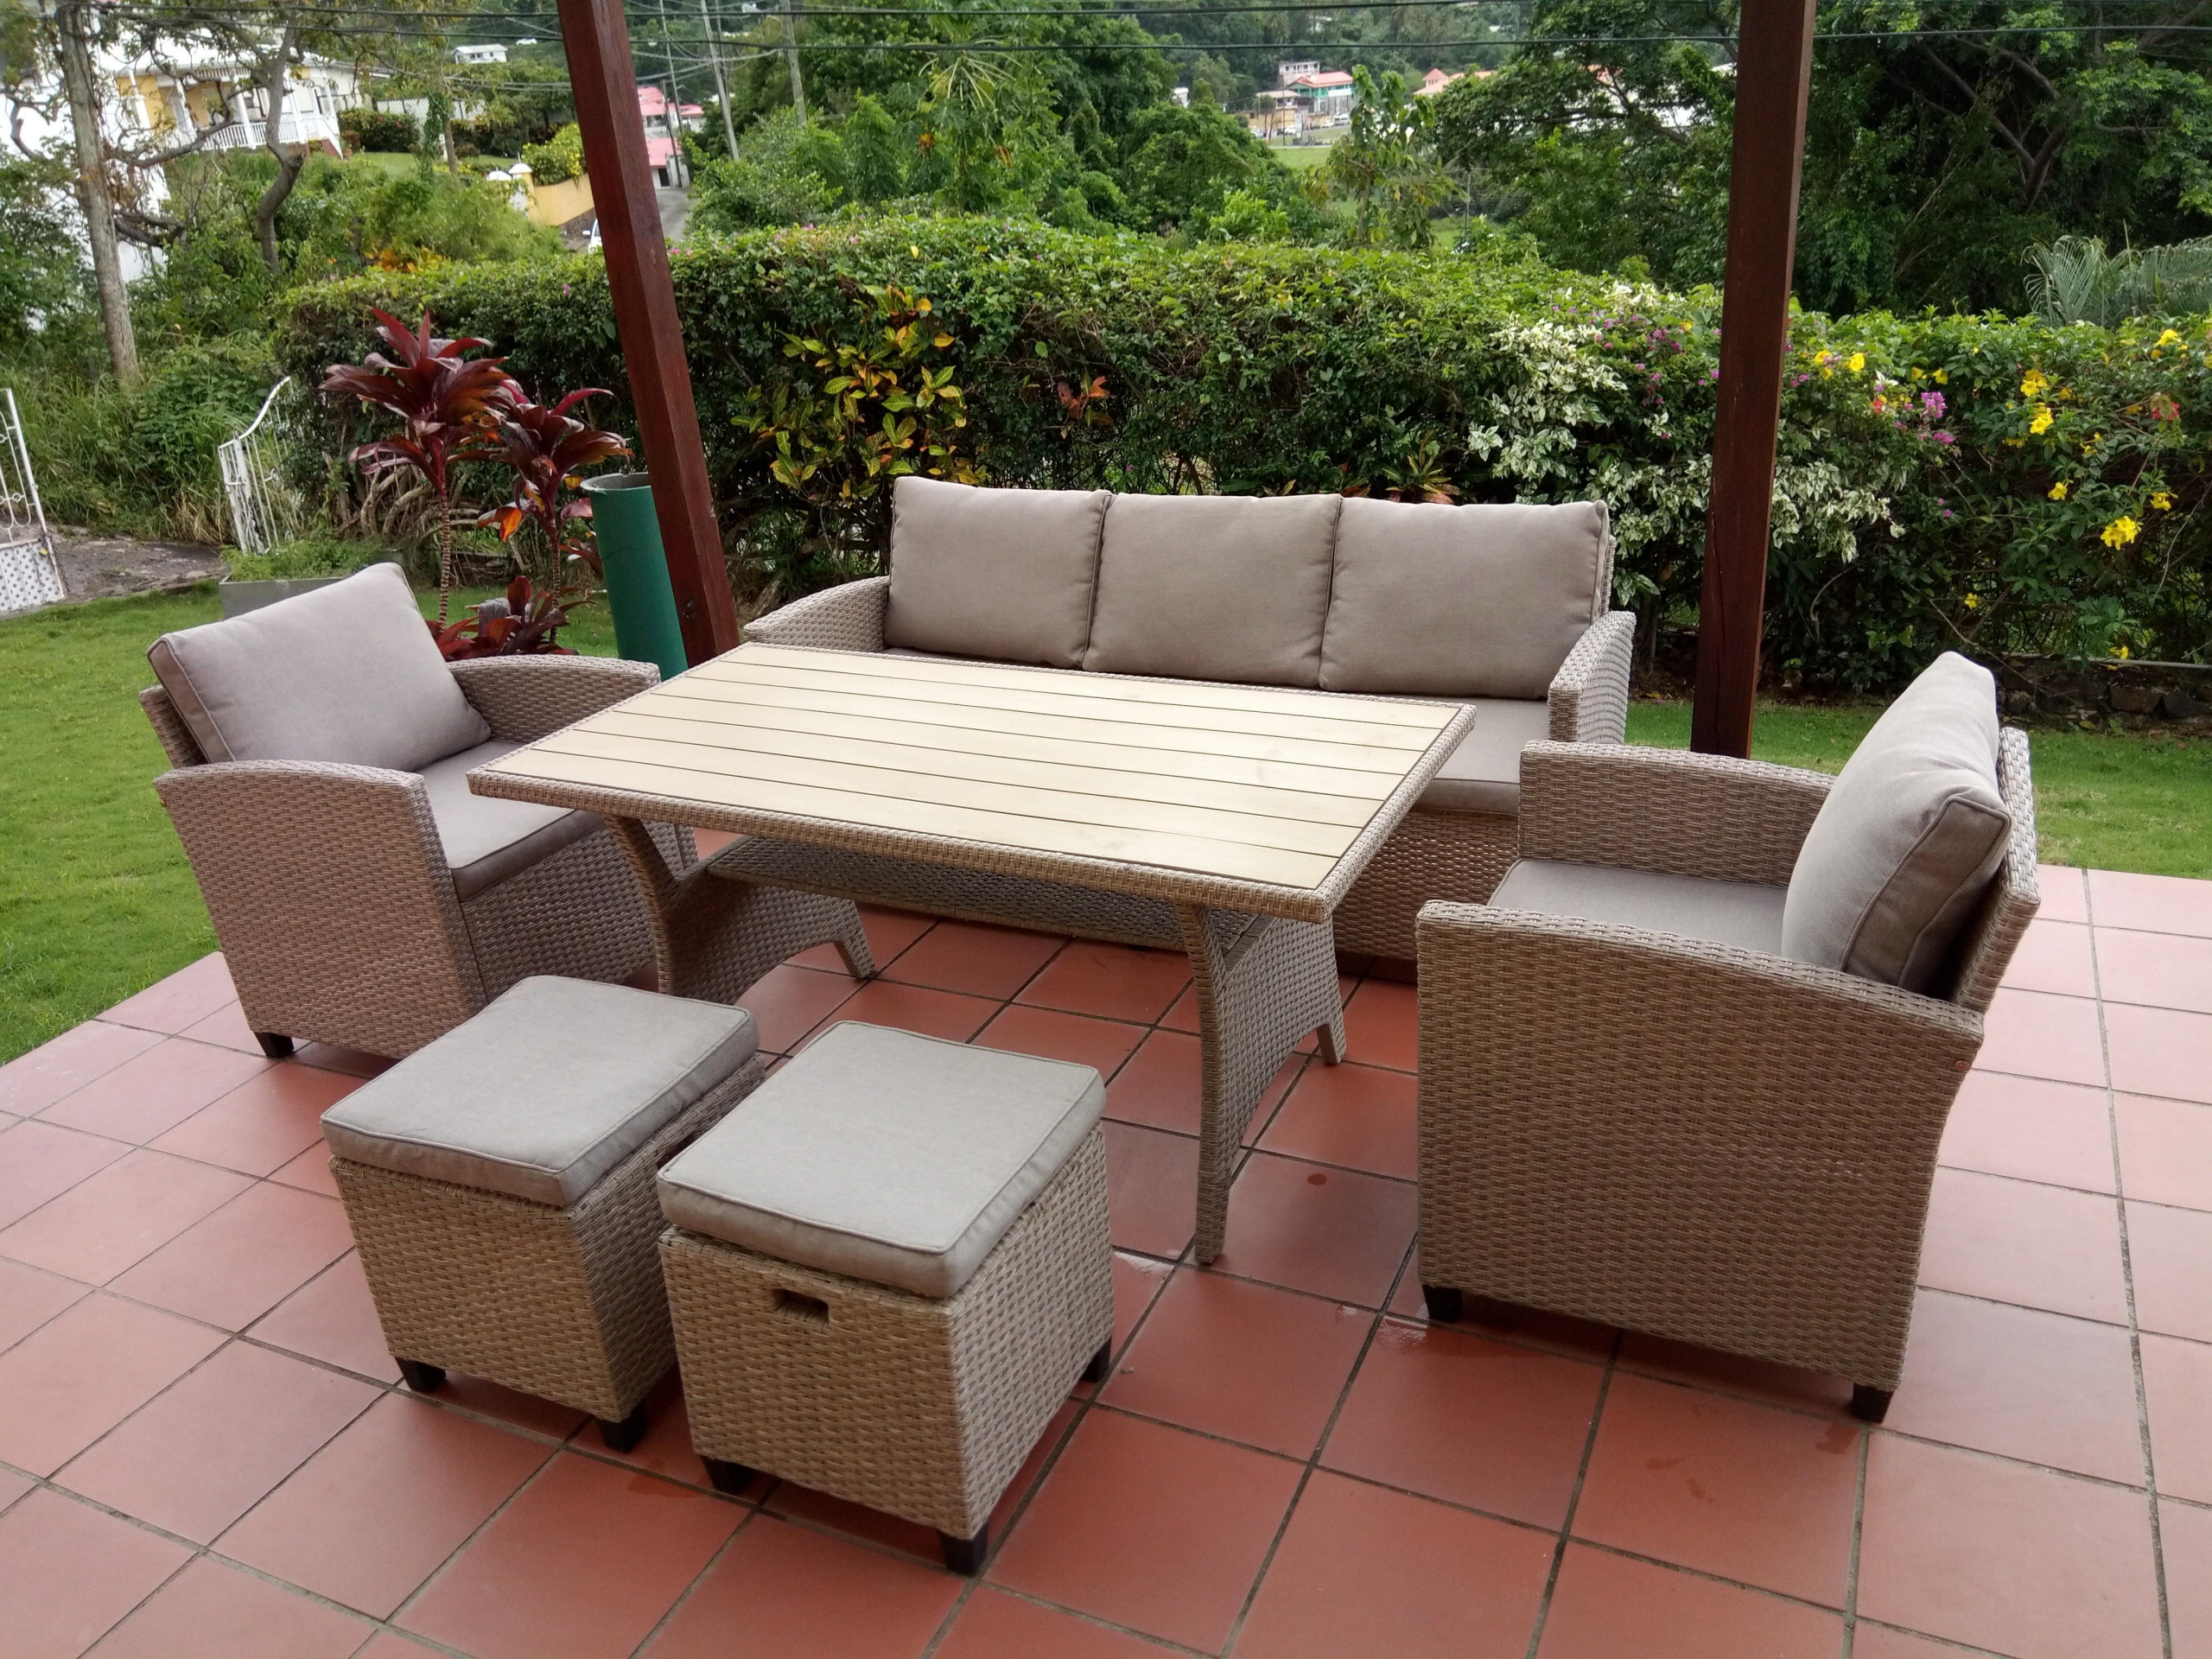 FURNISHED HOUSE FOR RENT ST LUCIA